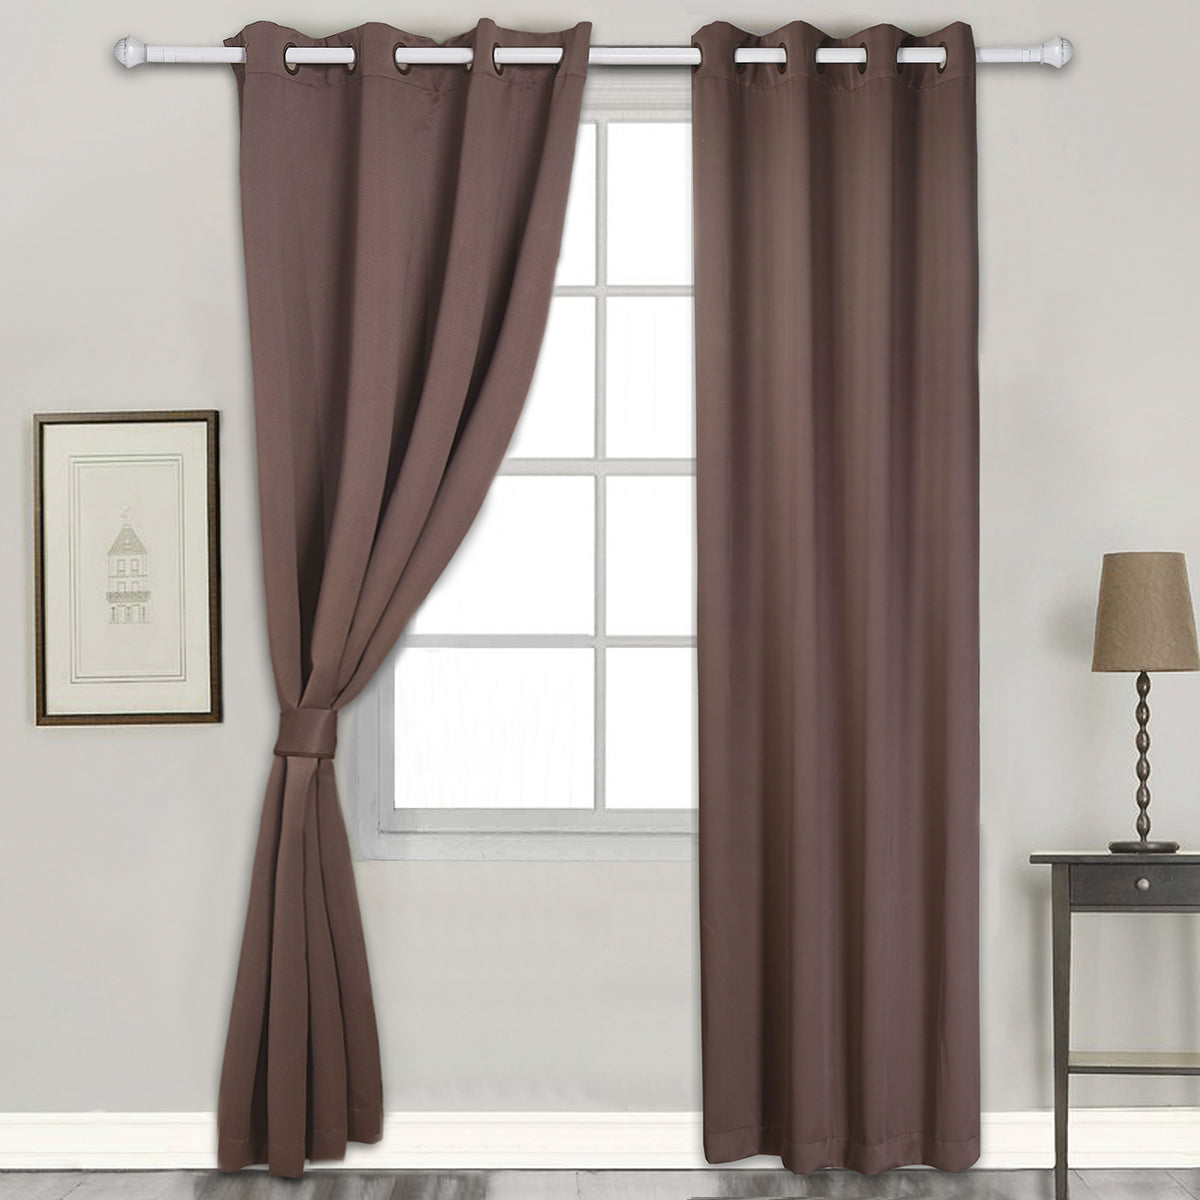 Everything You Should Consider Before Buying Blackout Curtains – Vaulia  Home Collection